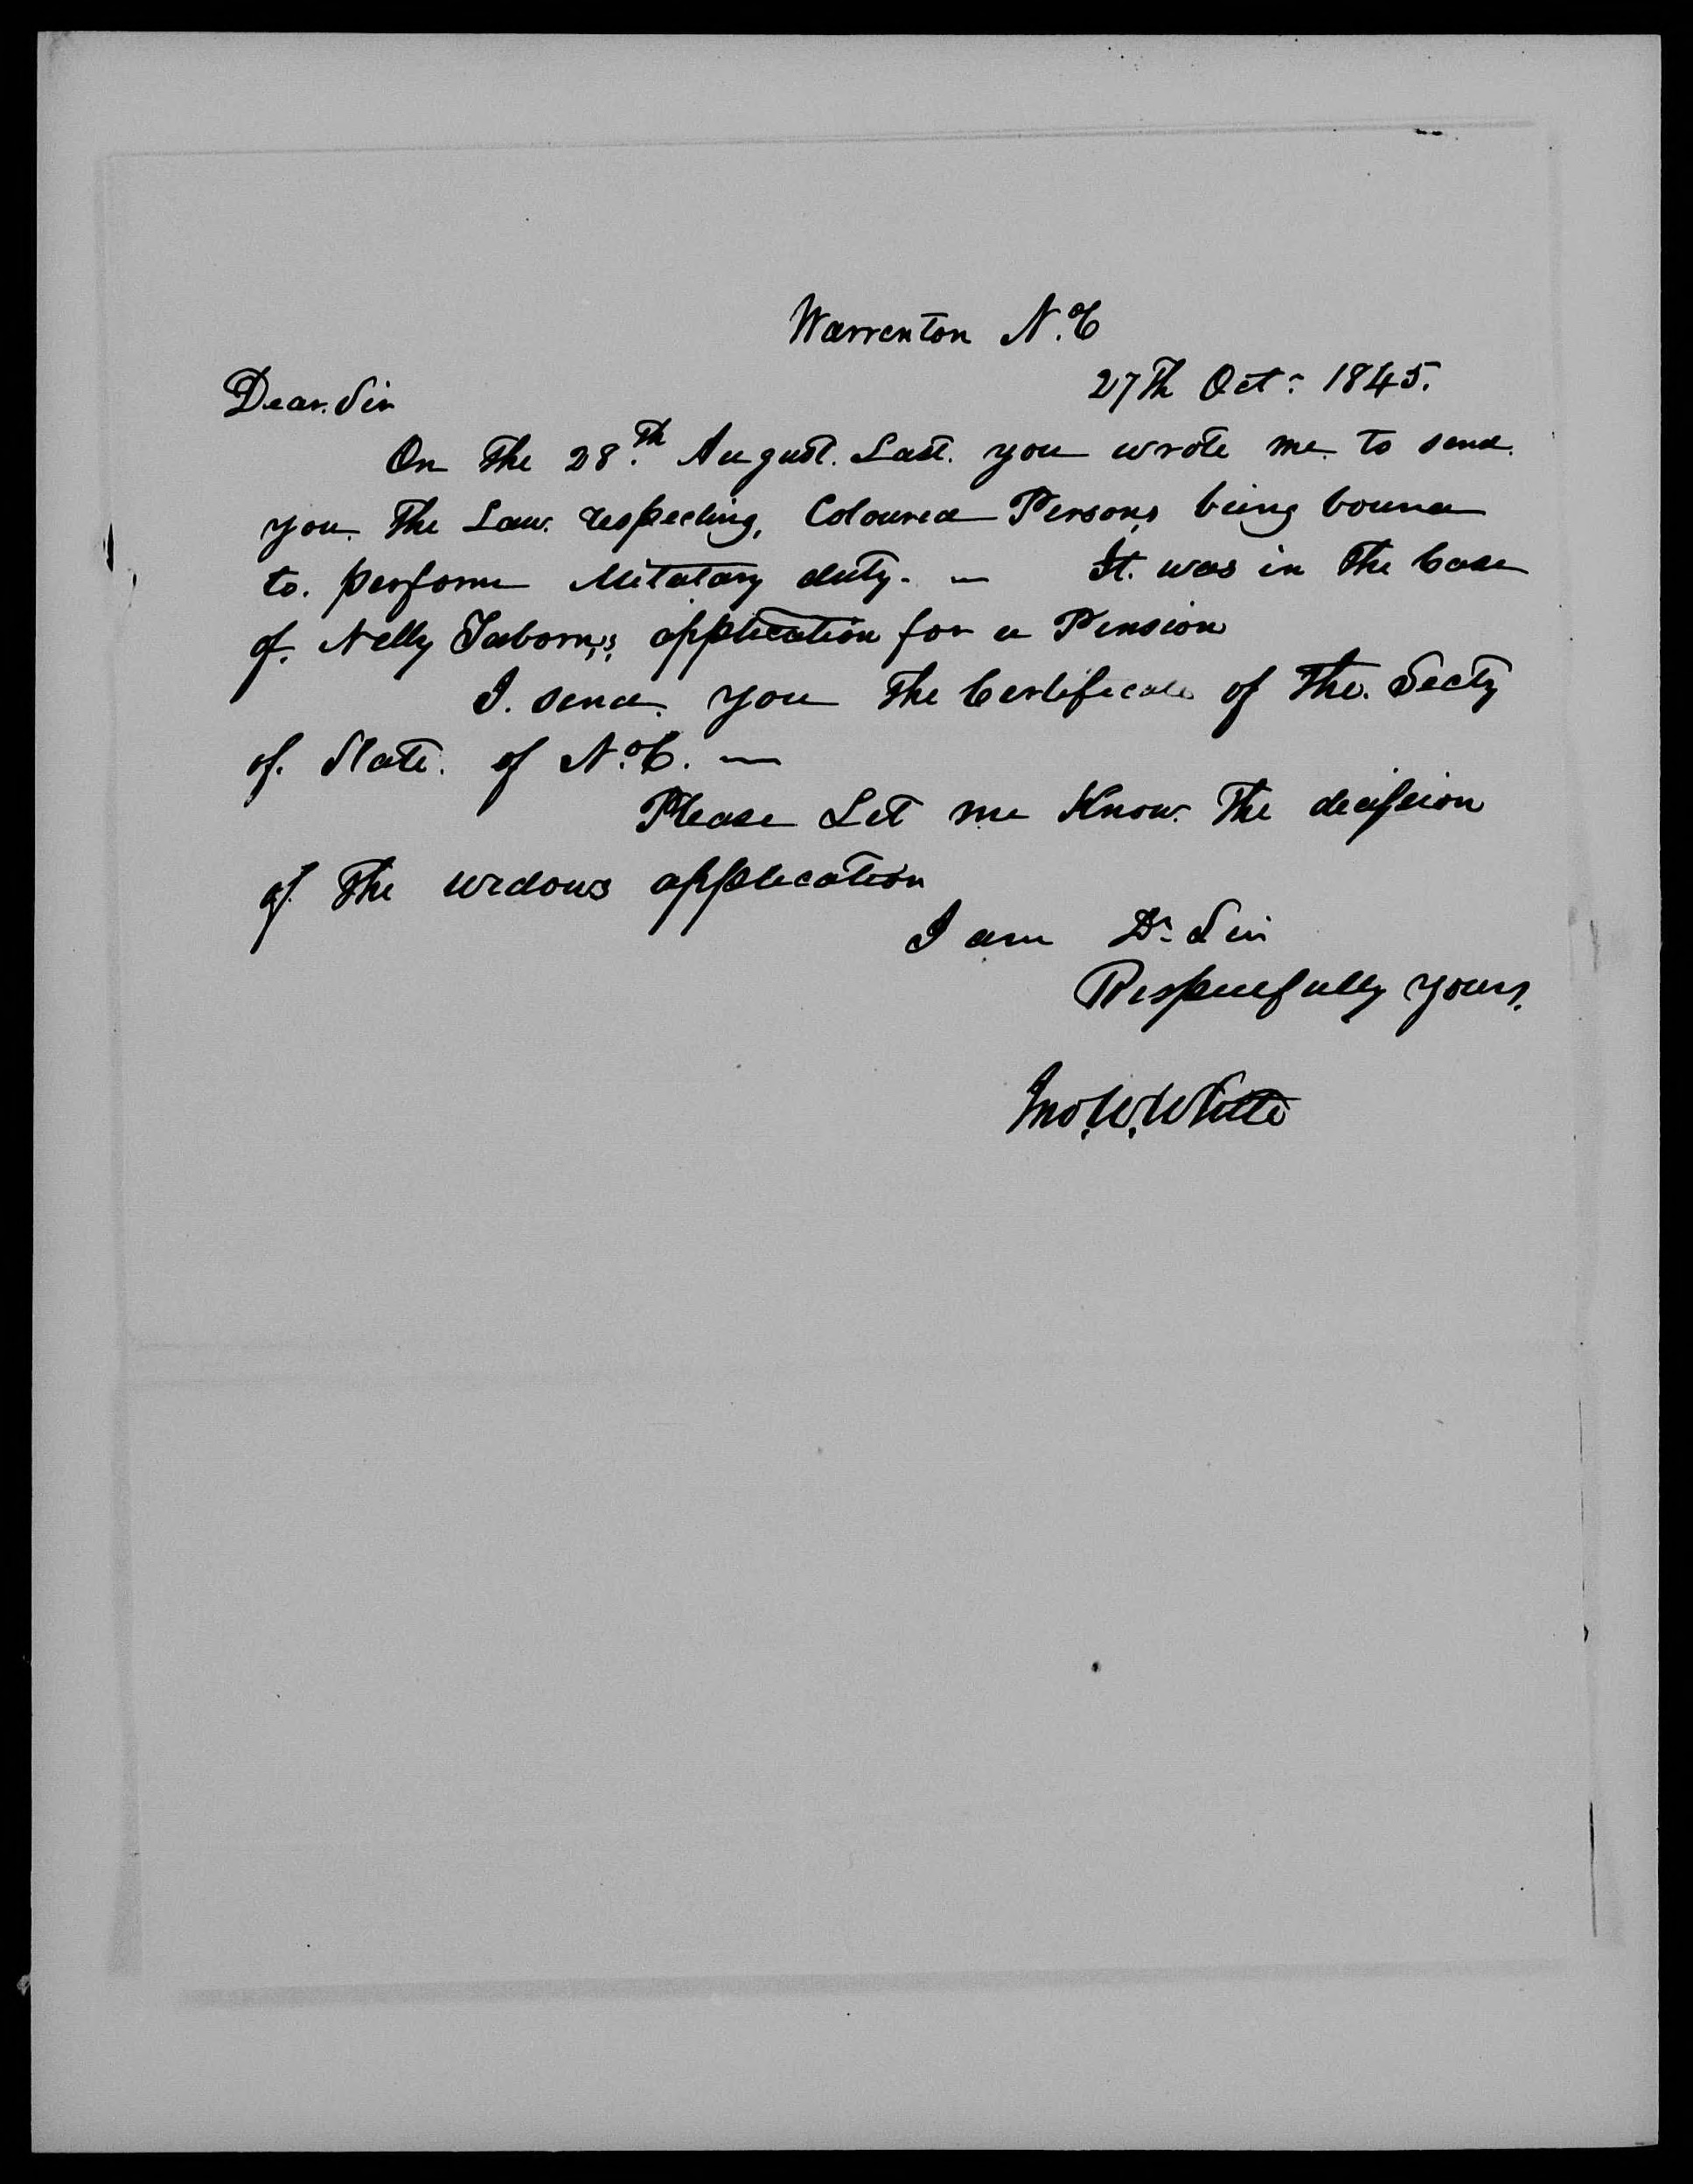 Letter from John W. White to James L. Edwards, 27 October 1845, page 1